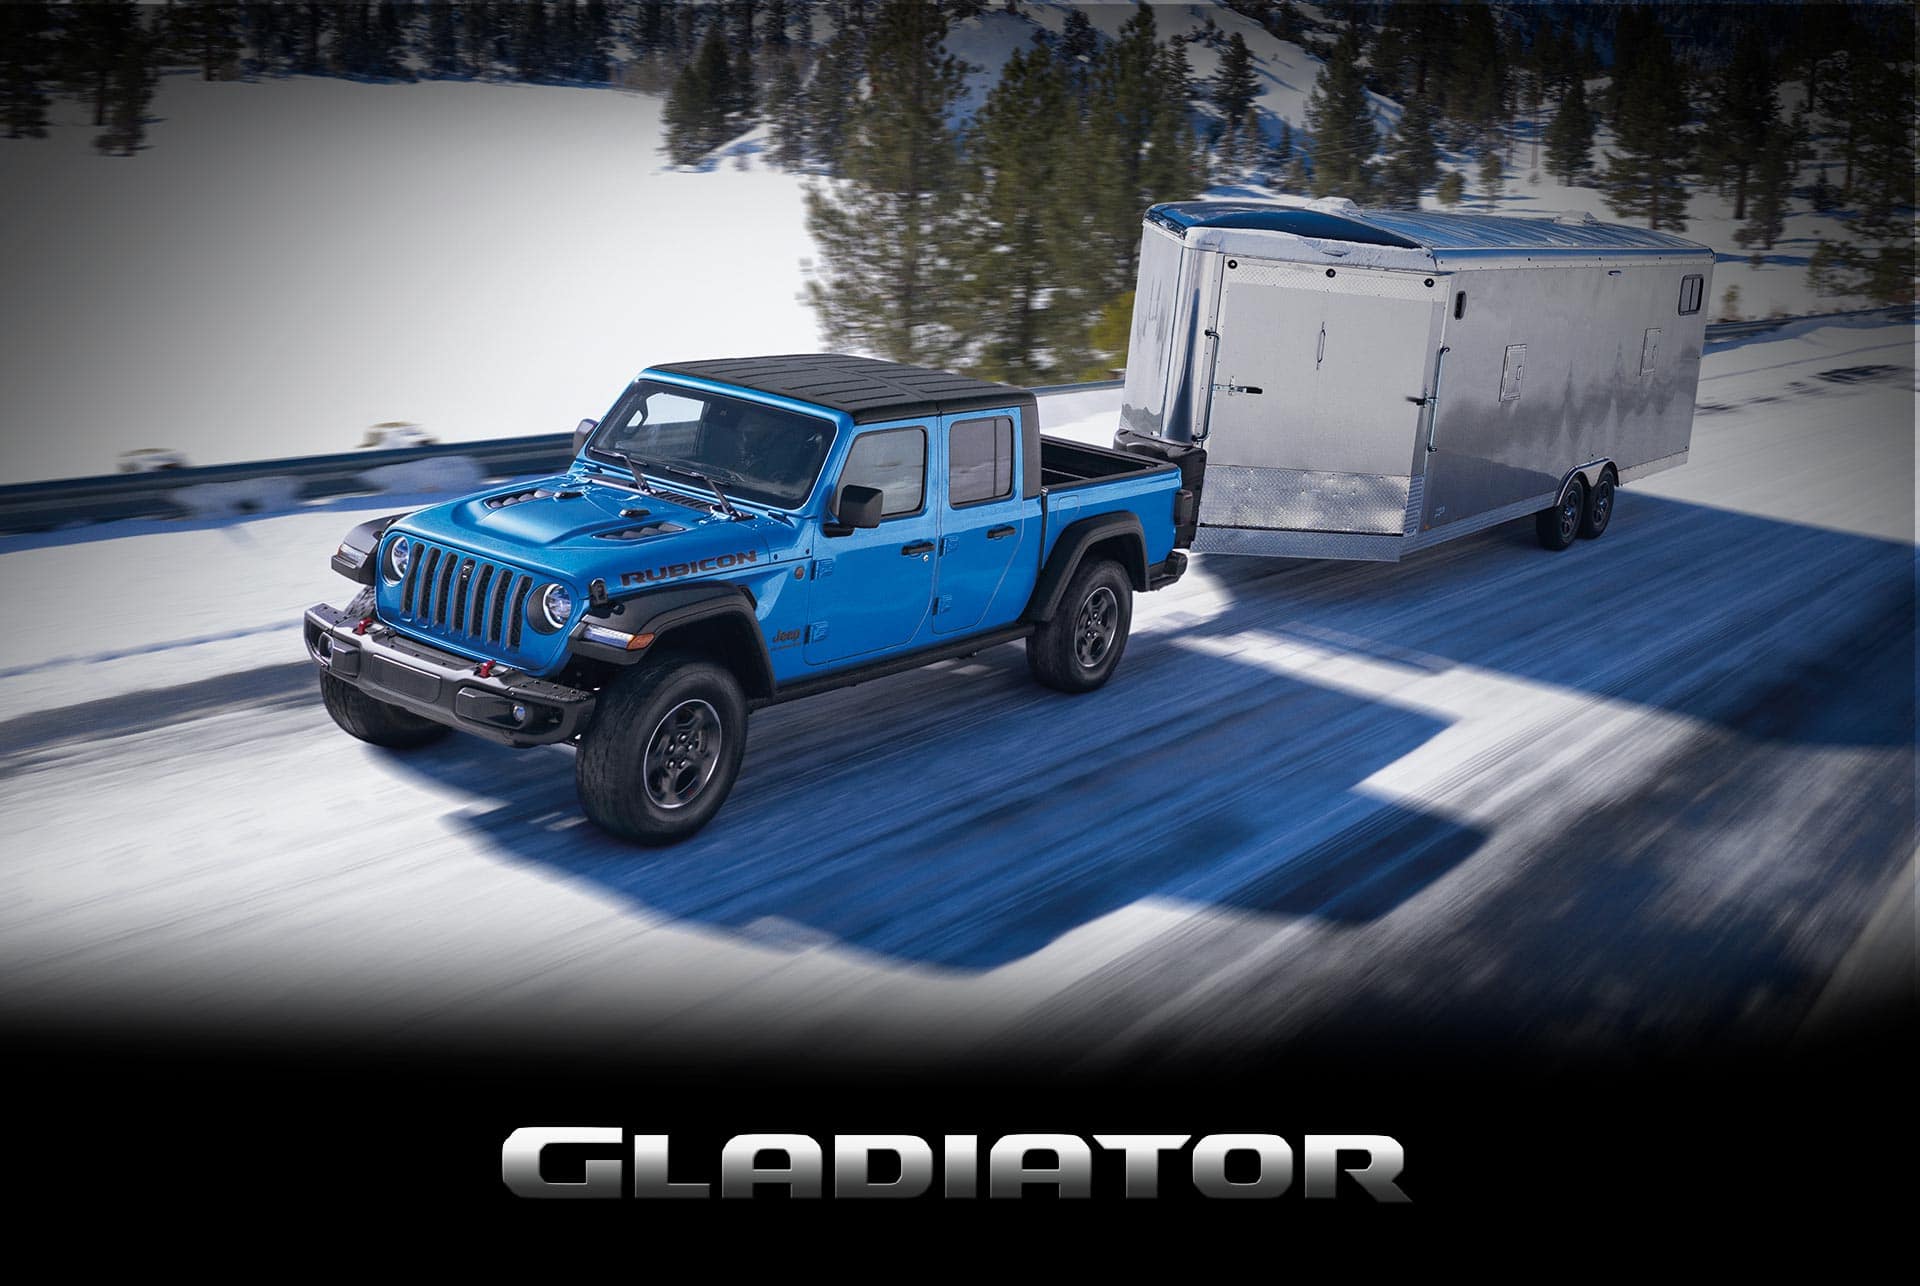 The 2022 Jeep Gladiator Rubicon towing an enclosed trailer on a snowy mountain road.